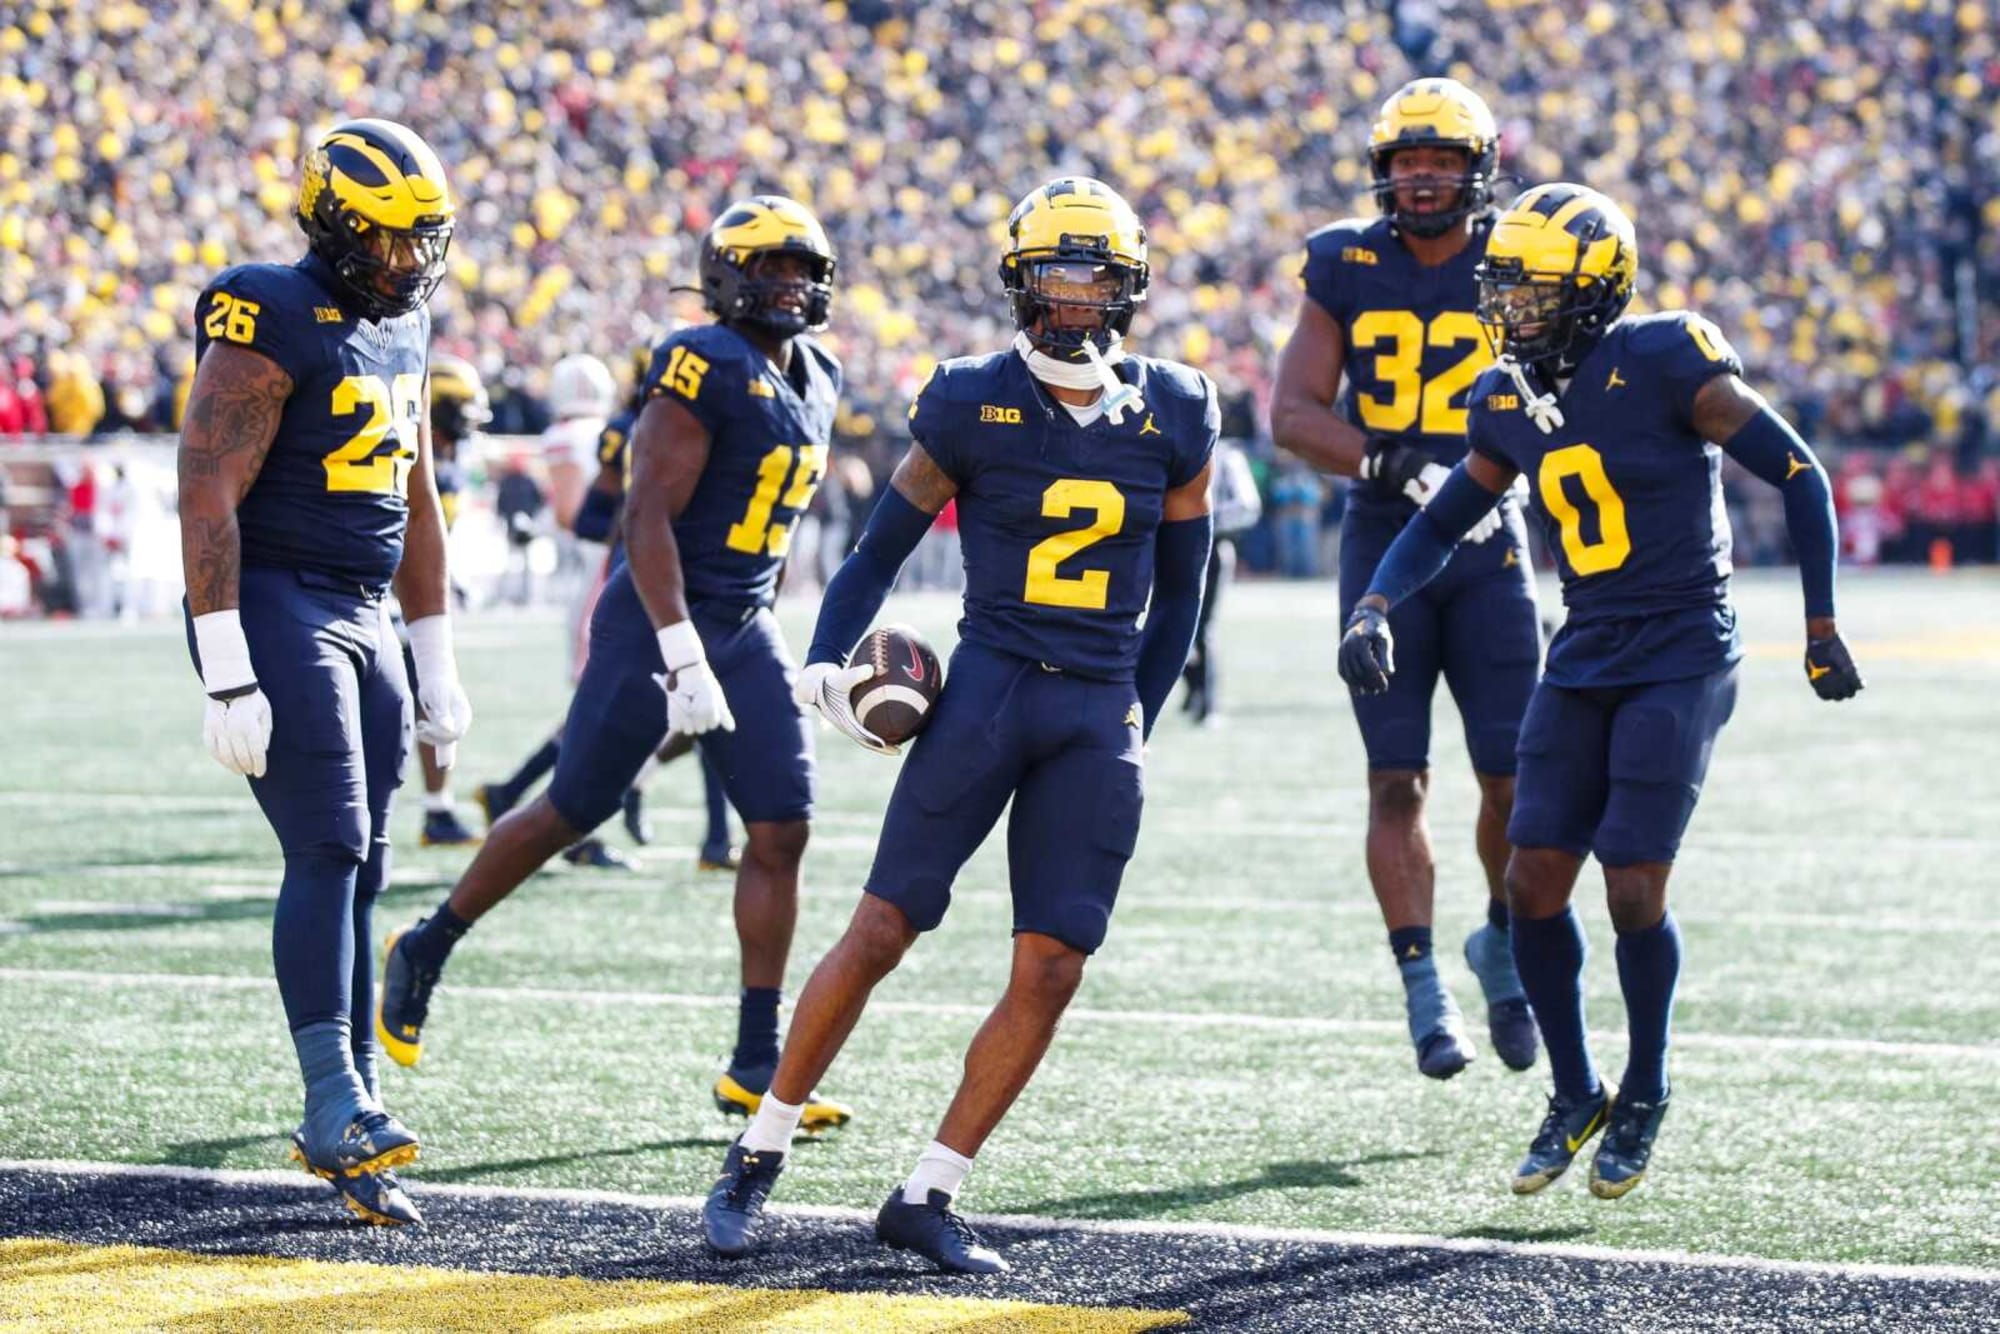 Who Michigan Fans Should Root For On Championship Weekend